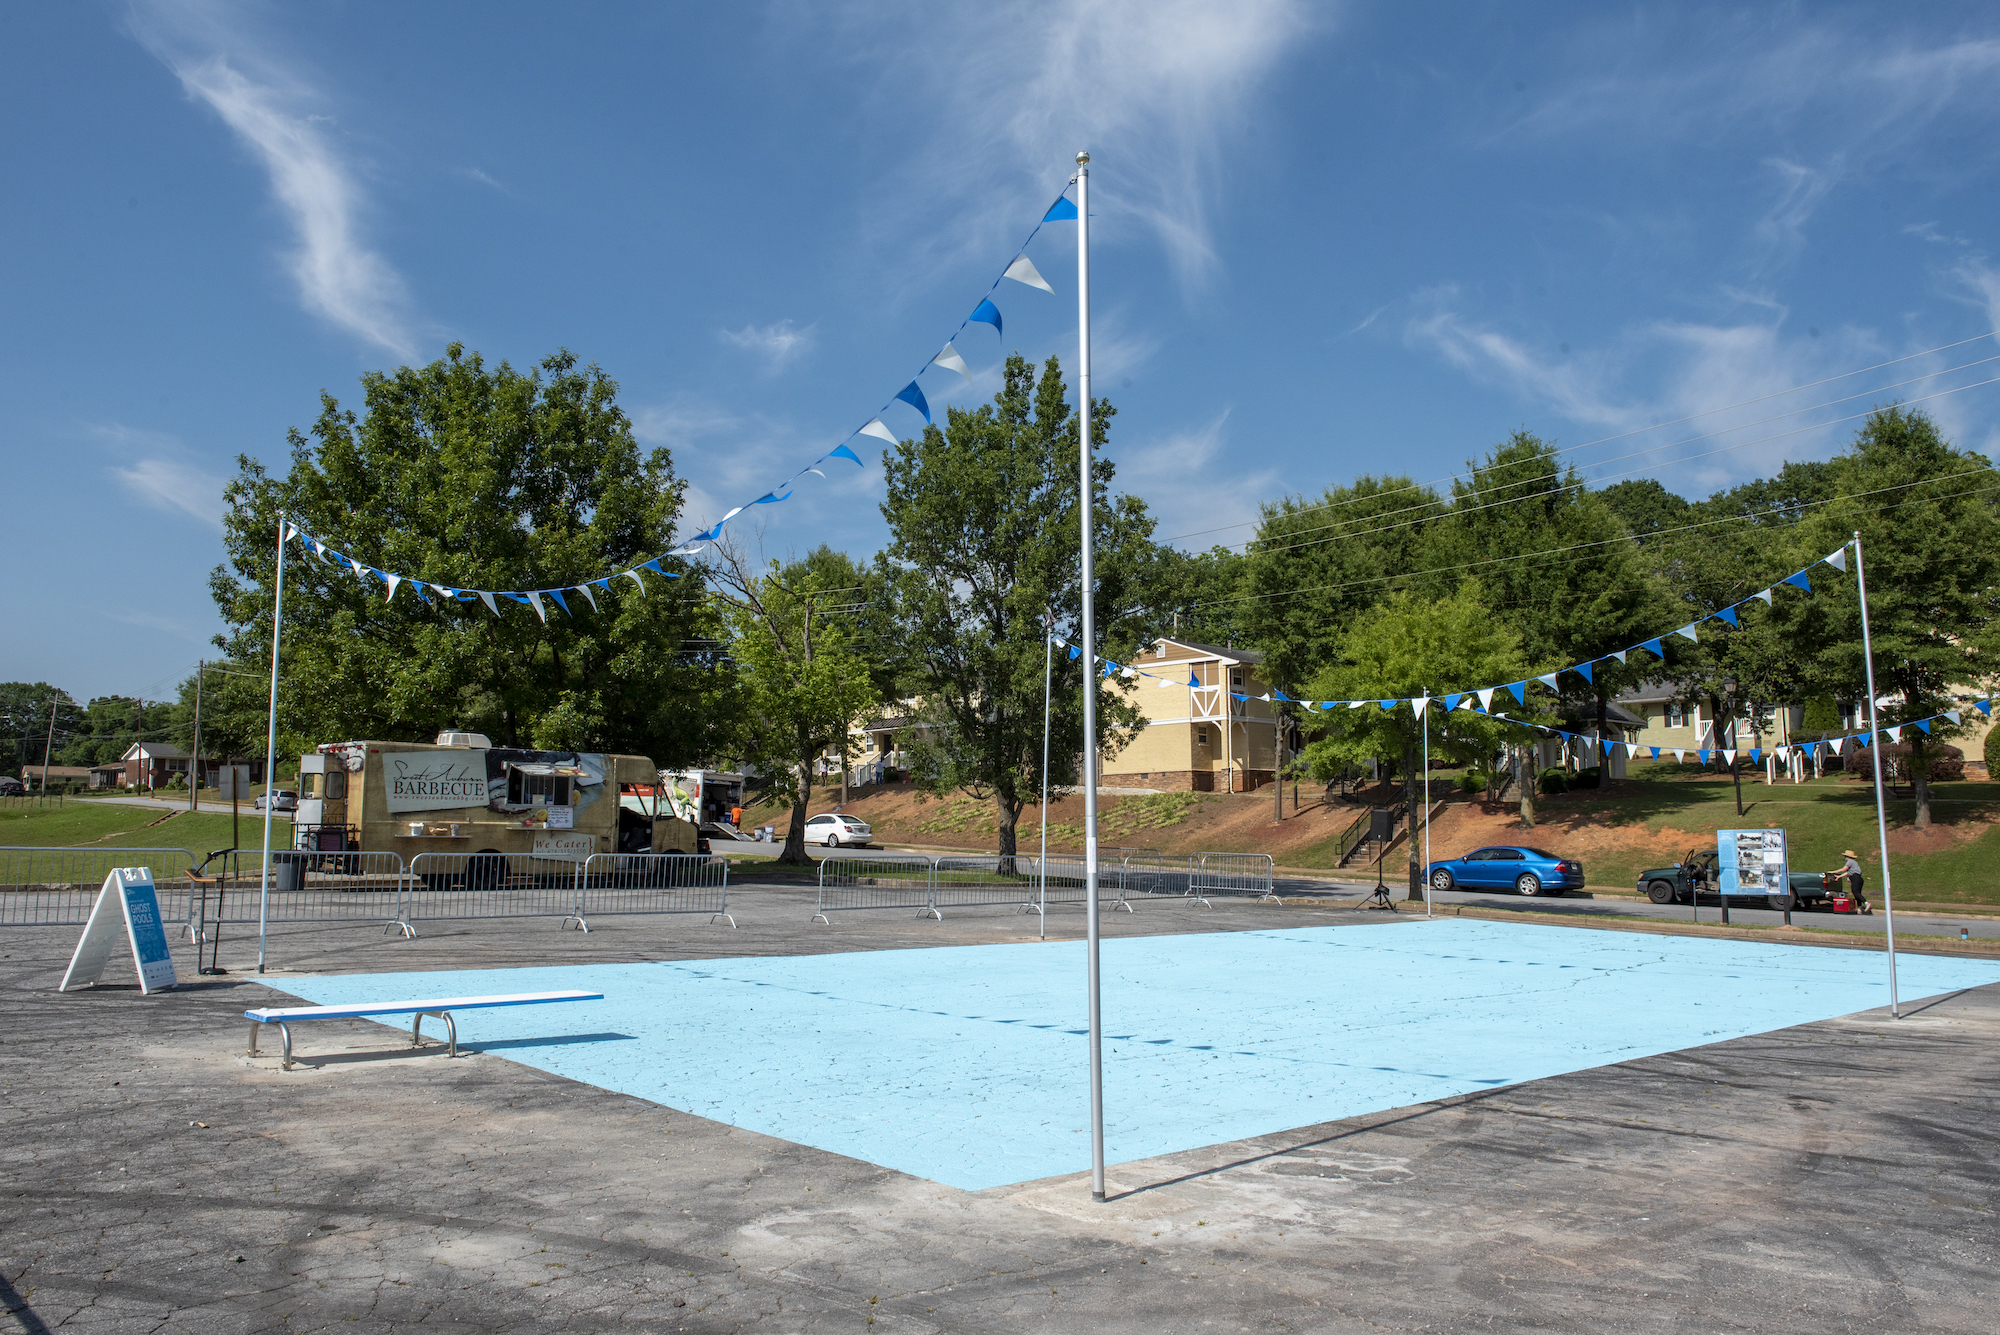 A giant rectangle within a parking lot is painted light blue with a diving board at one end and poles and streamers around the perimeter on a bright sunny day.